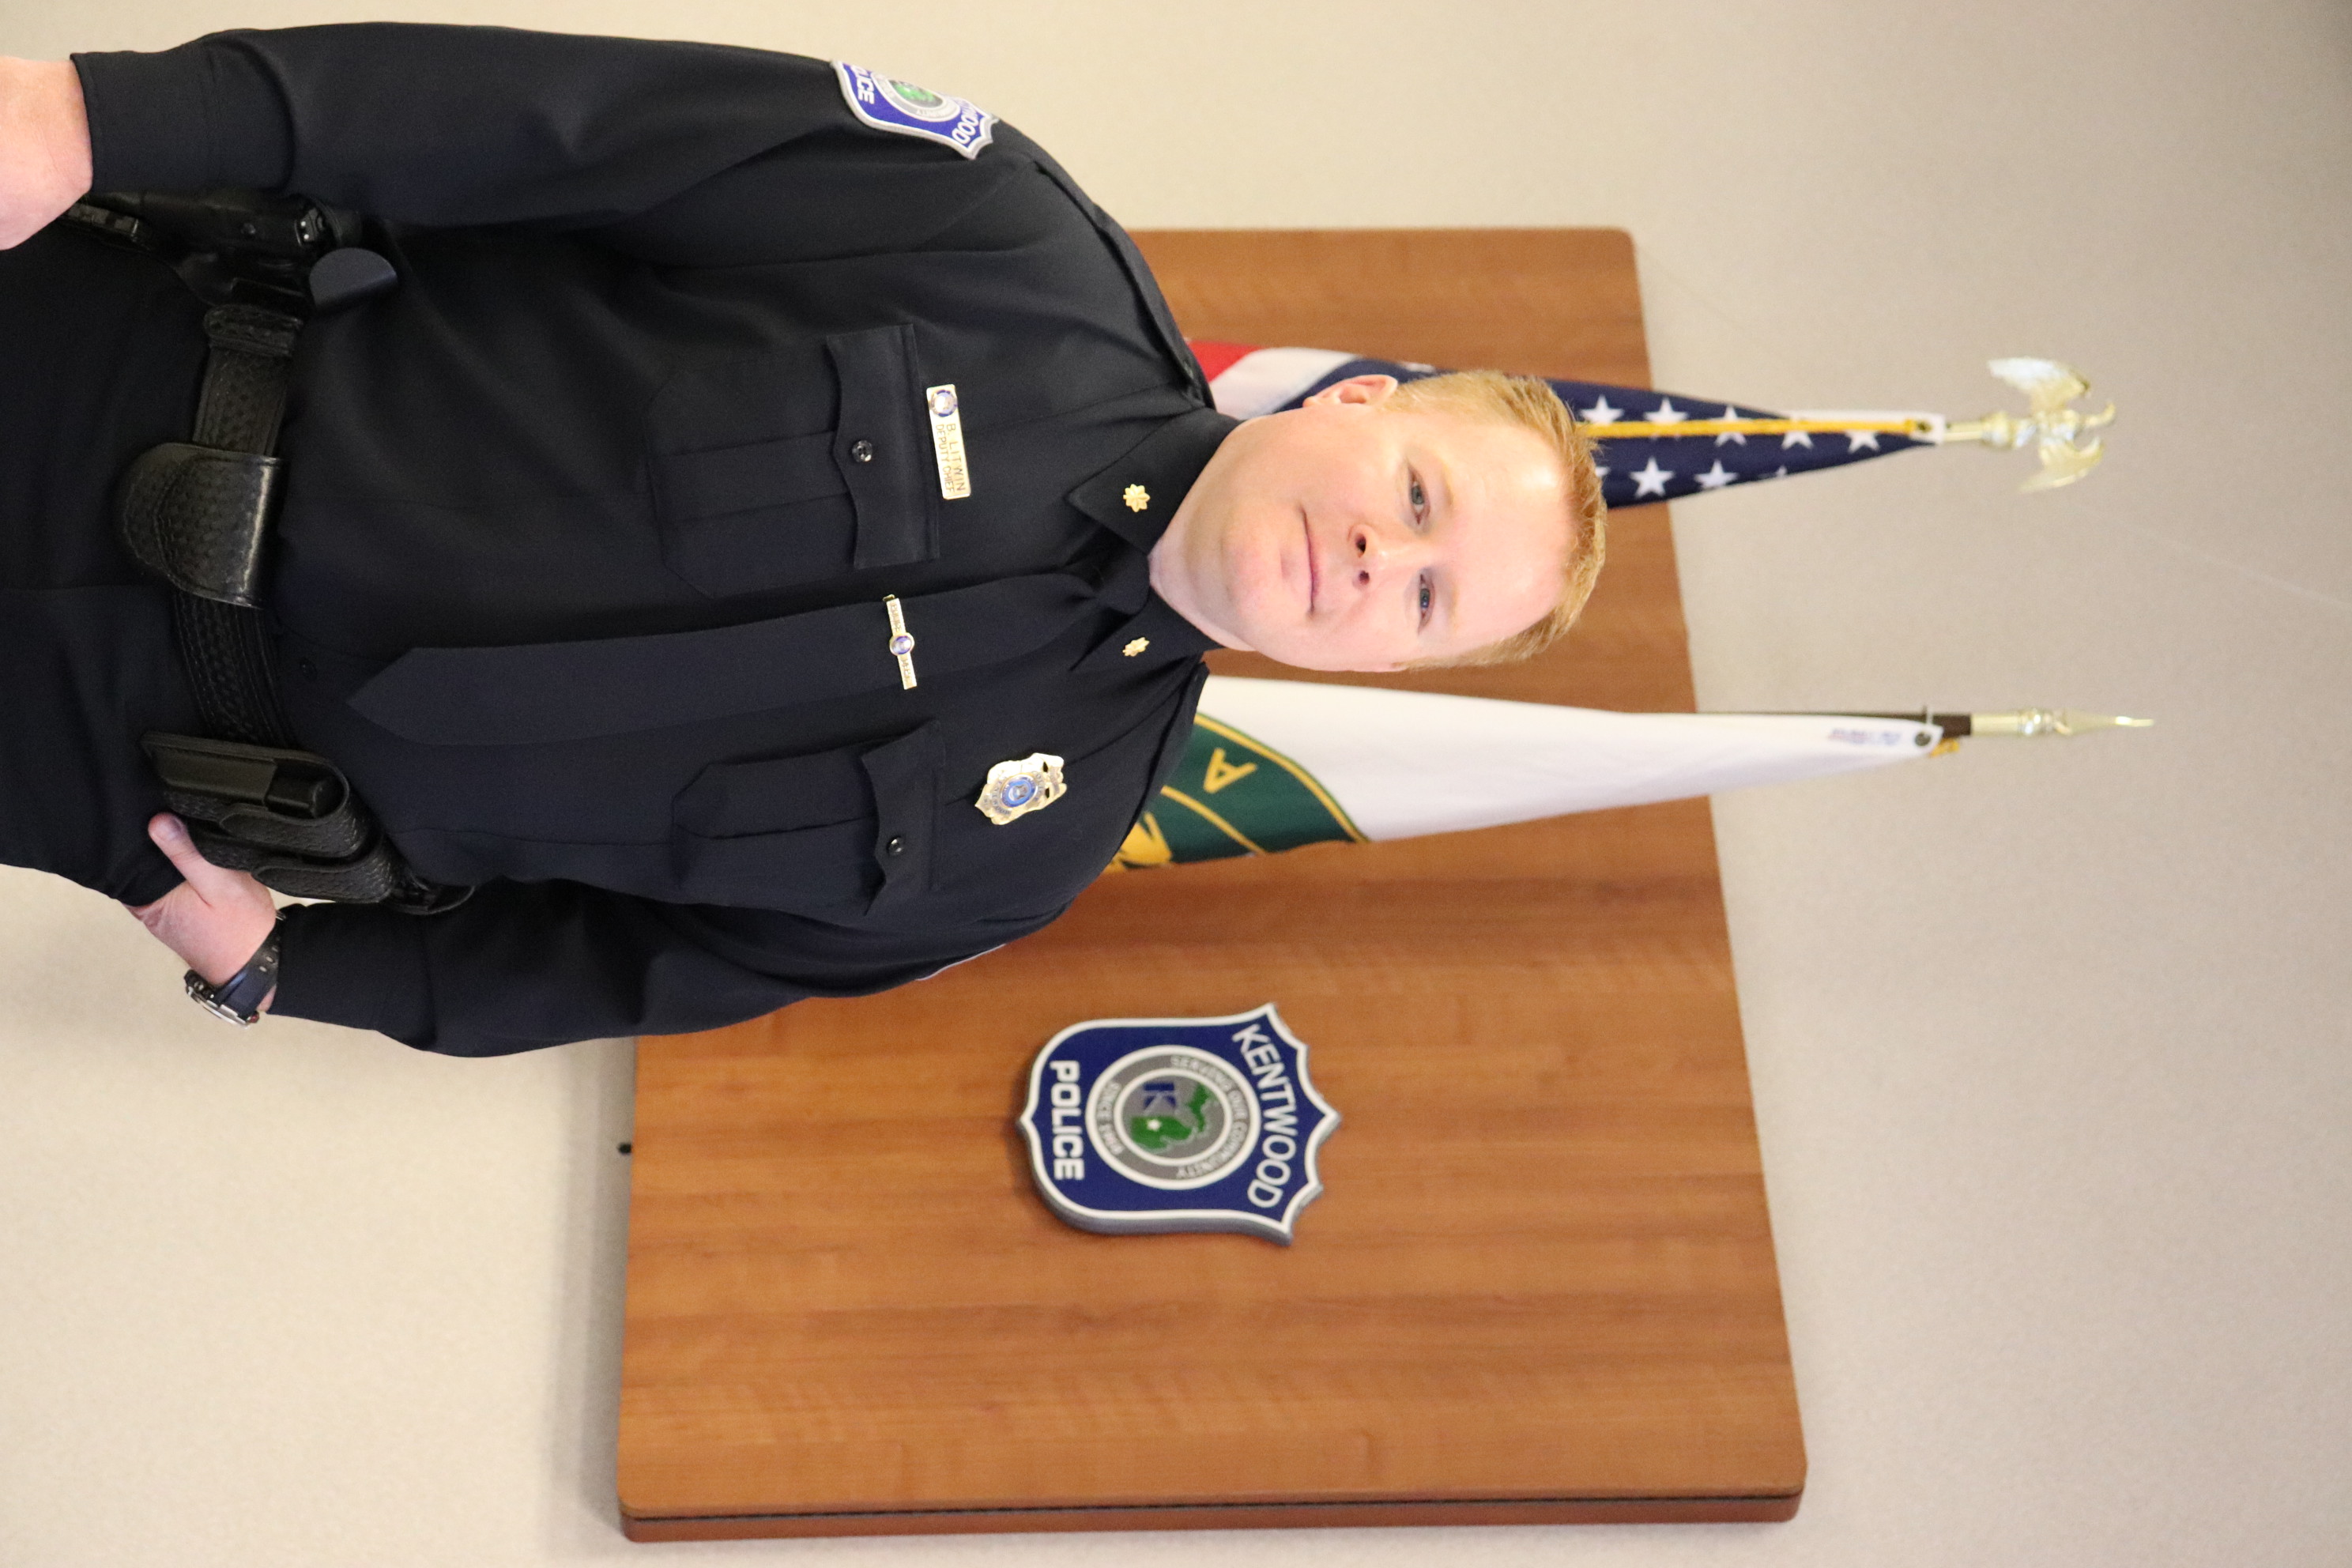 Bryan Litwin in front of the American and City of Kentwood flags and the Kentwood Police Department Patch